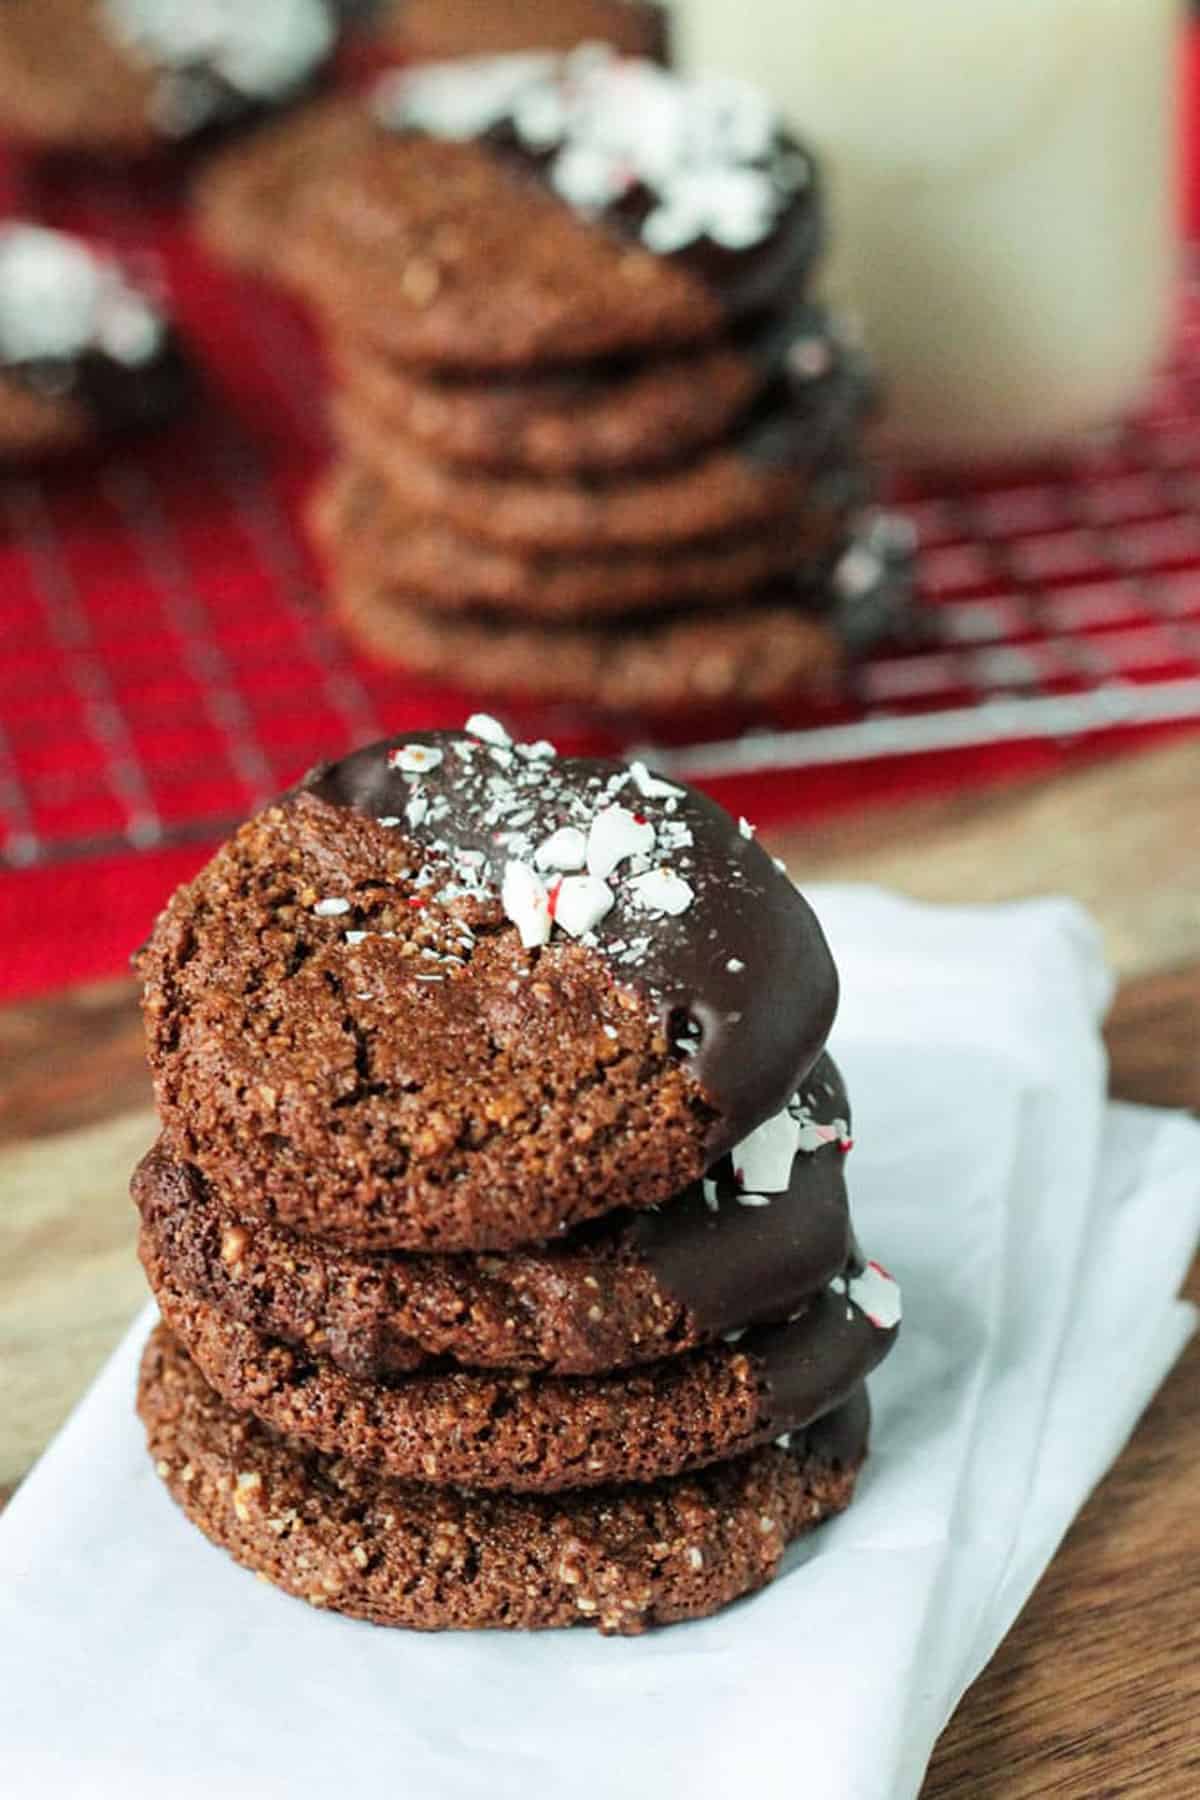 Stack of chocolate molasses cookies partially dipped in chocolate and sprinkled with crushed peppermint candies.